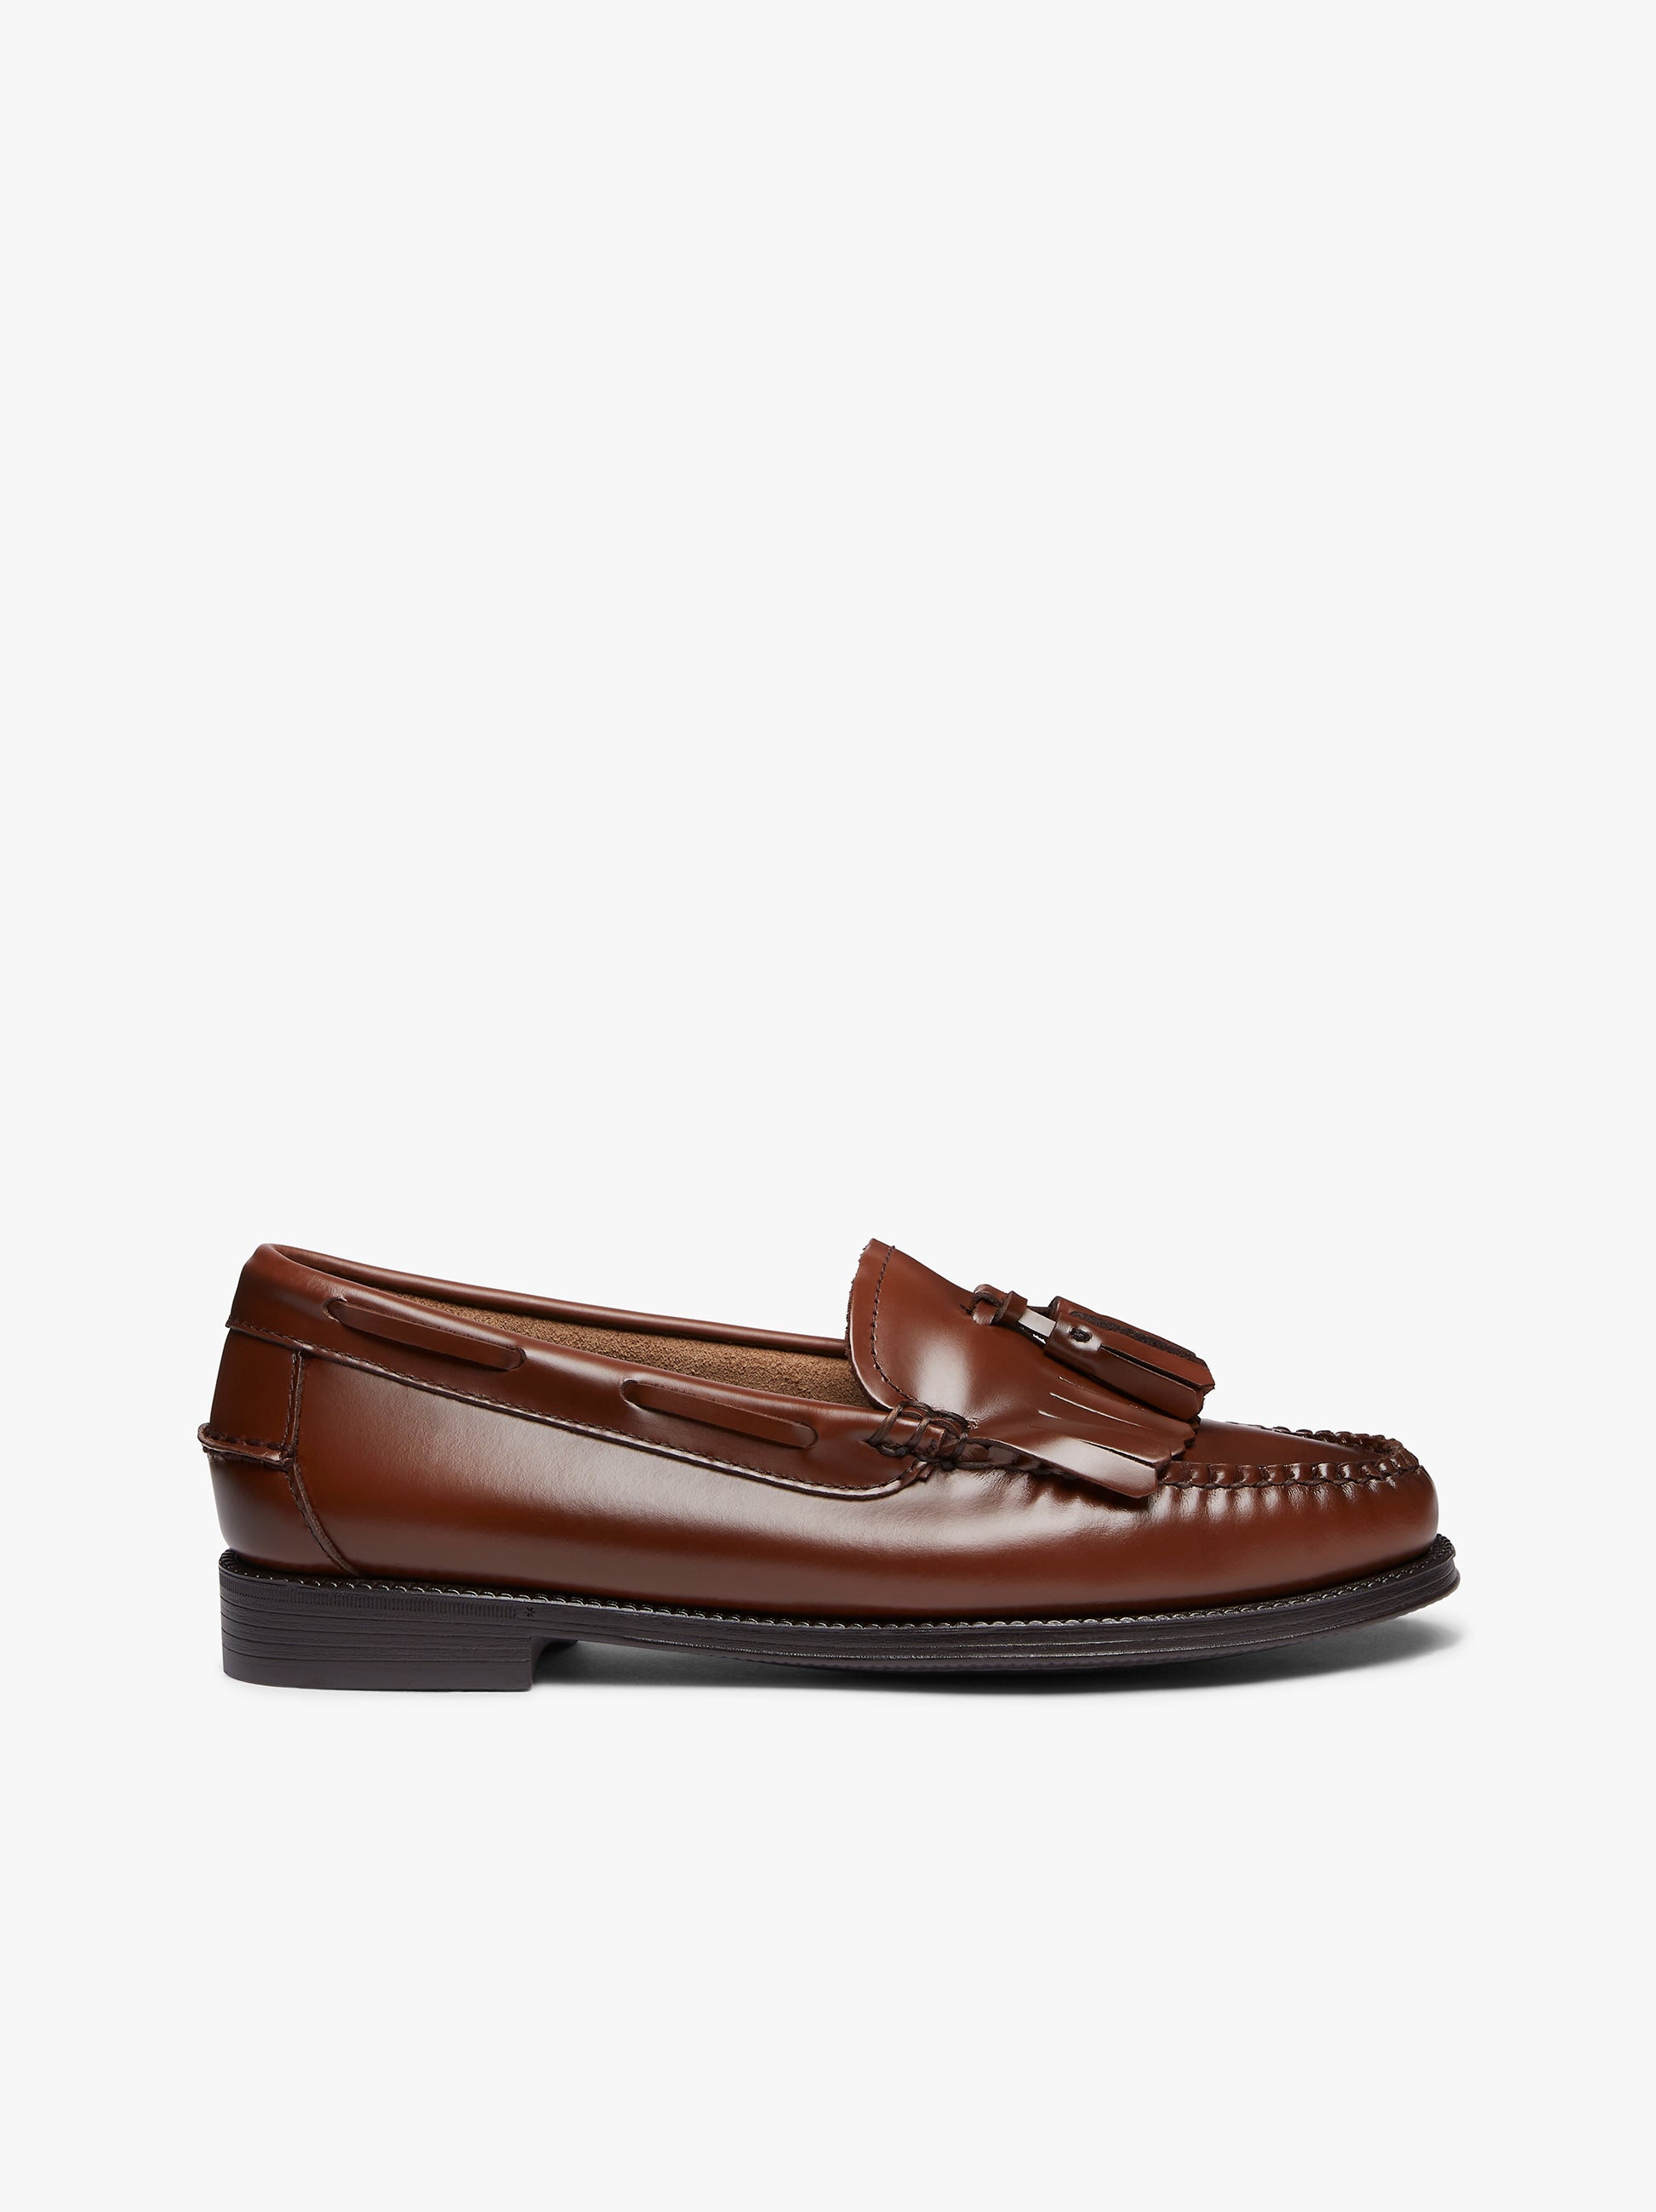 Cognac Leather Loafers Womens | Tassel Loafers Womens – G.H.BASS